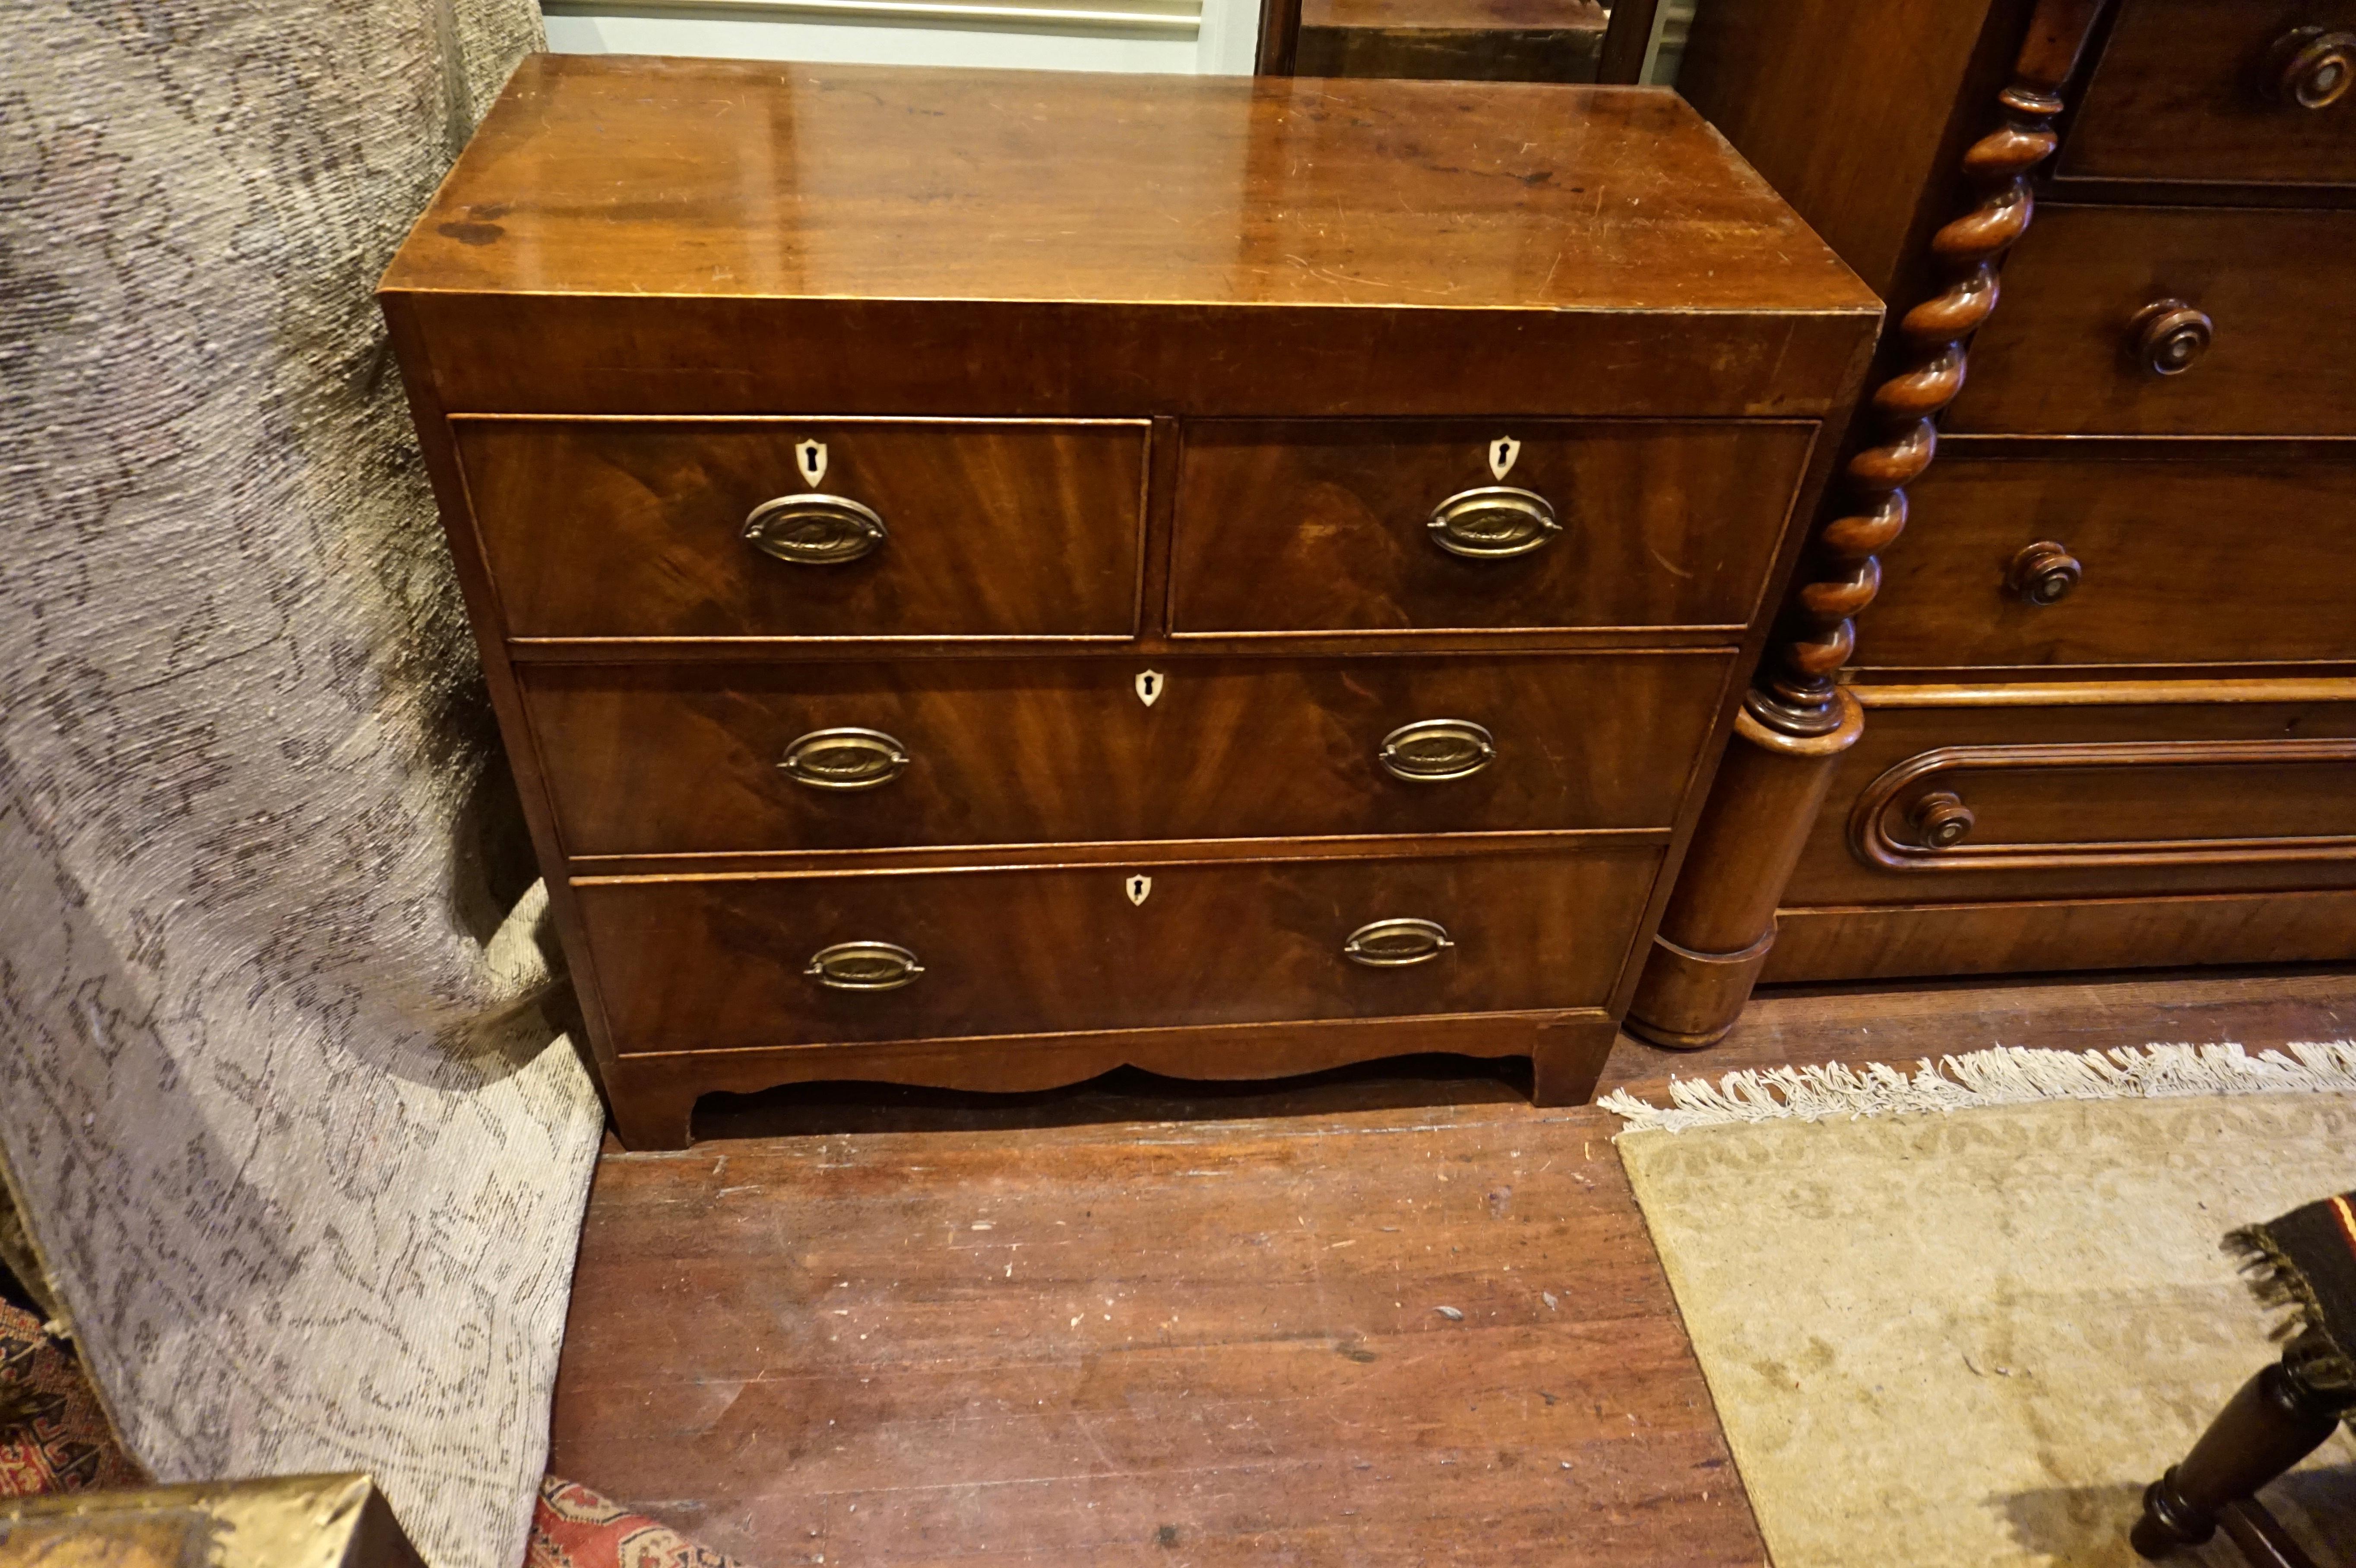 Flame mahogany chest of drawers from the Georgian era with dovetail joints, patinated oval brass handles depicting a bird in flight. Original hardware and ivory key holes standout on the graduated drawers,
circa 1810-1830.
 